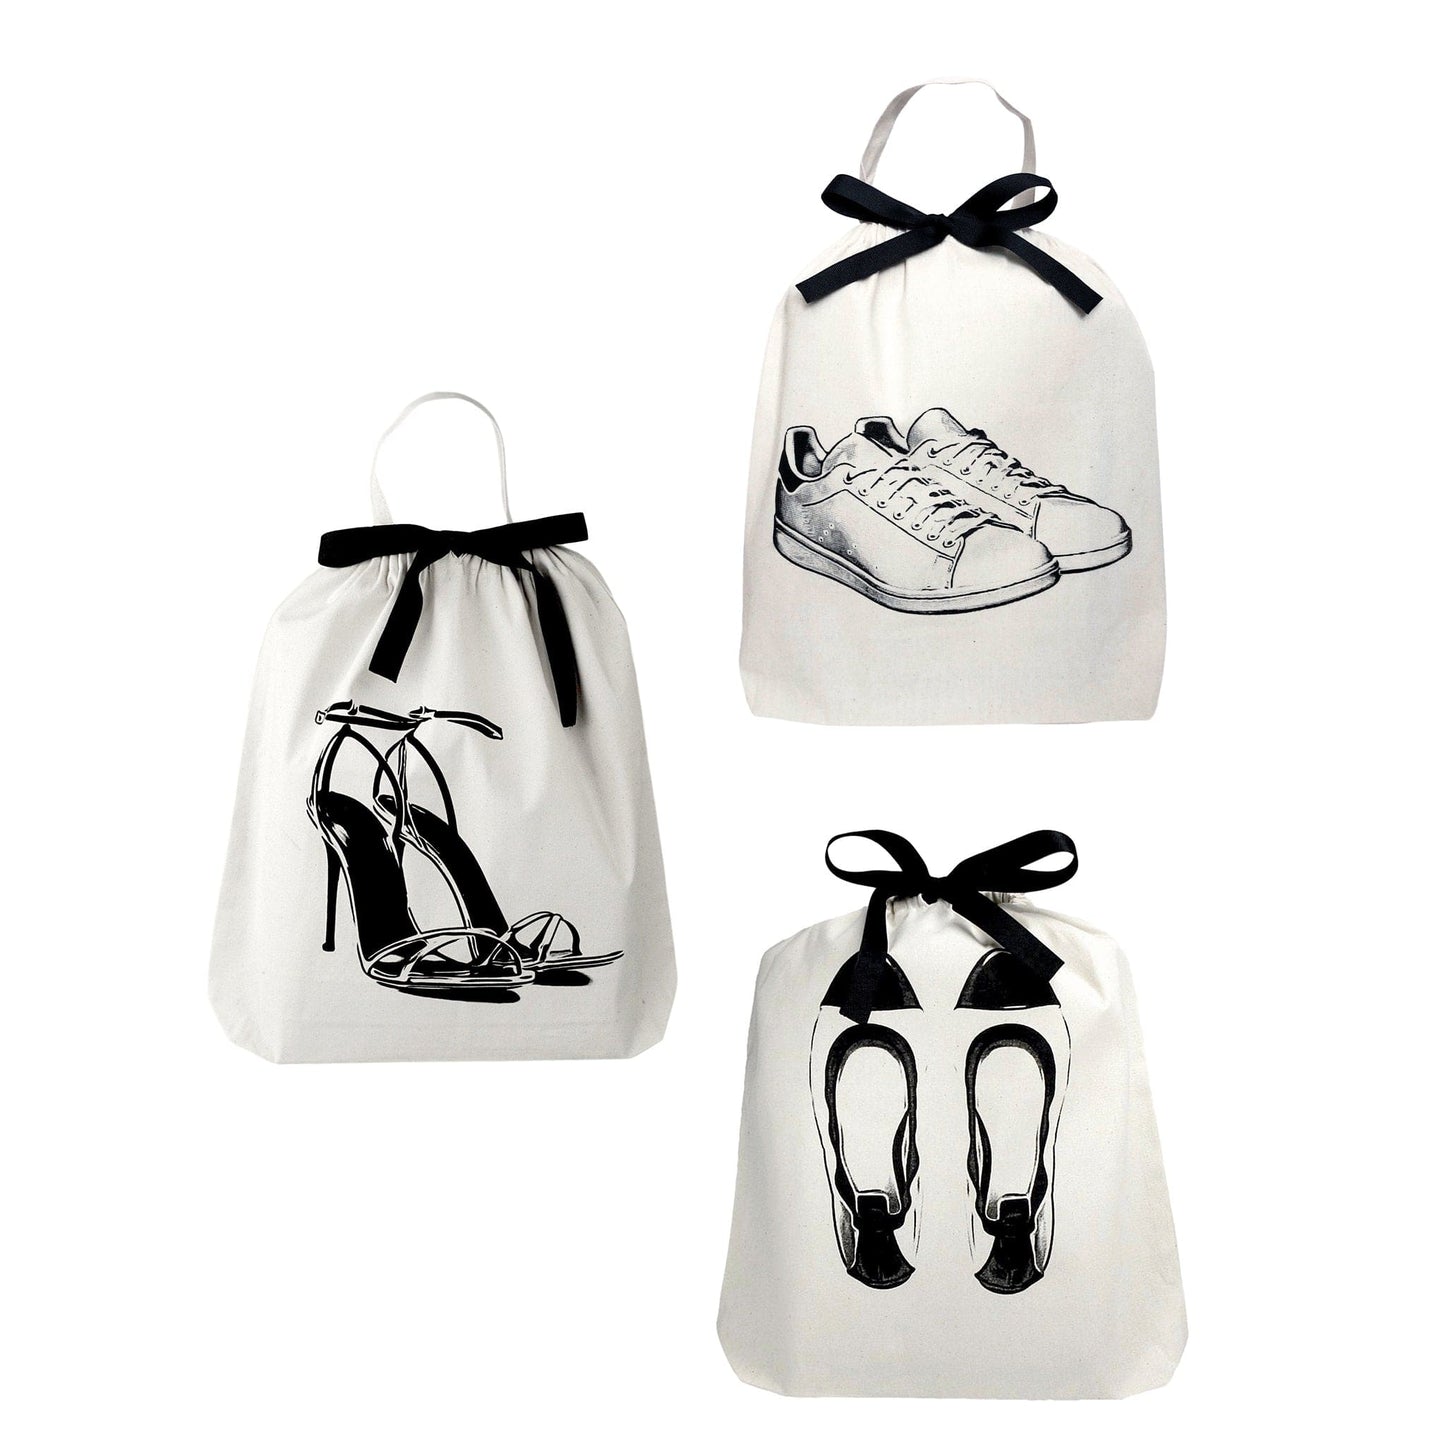 New collection matching bag & shoe set